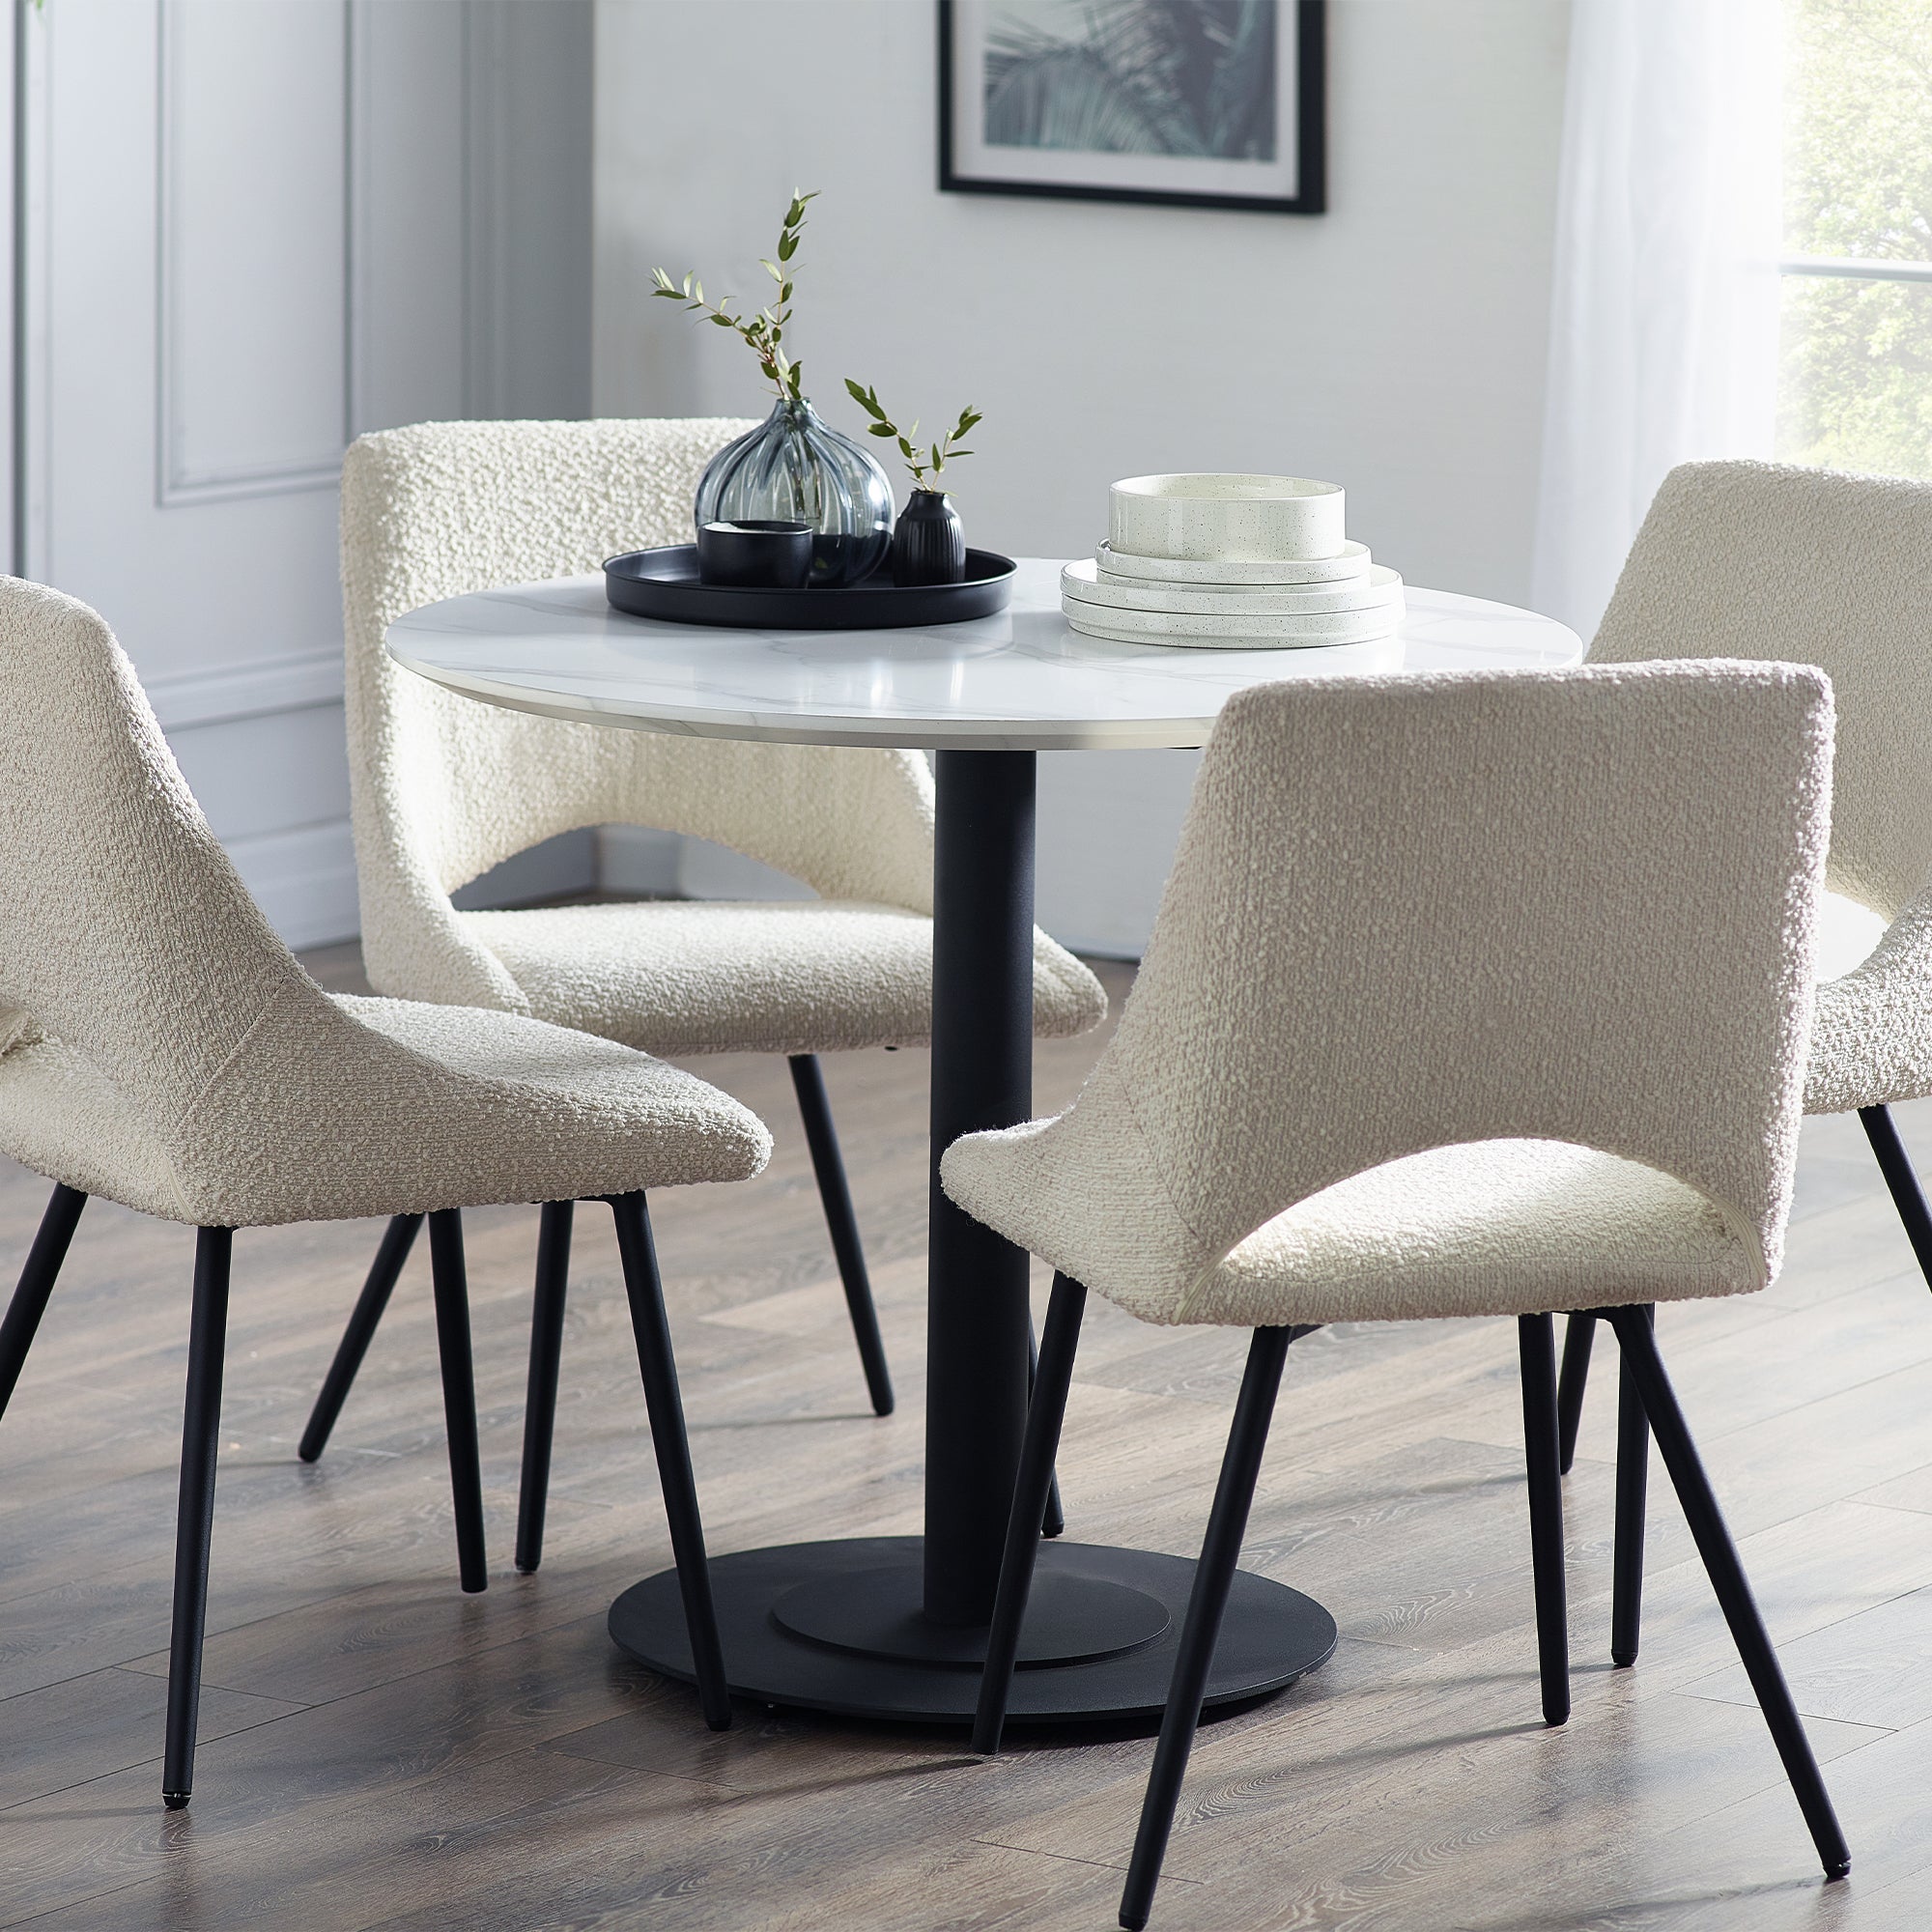 Luca 4 Seater Round Dining Table Marble Off White